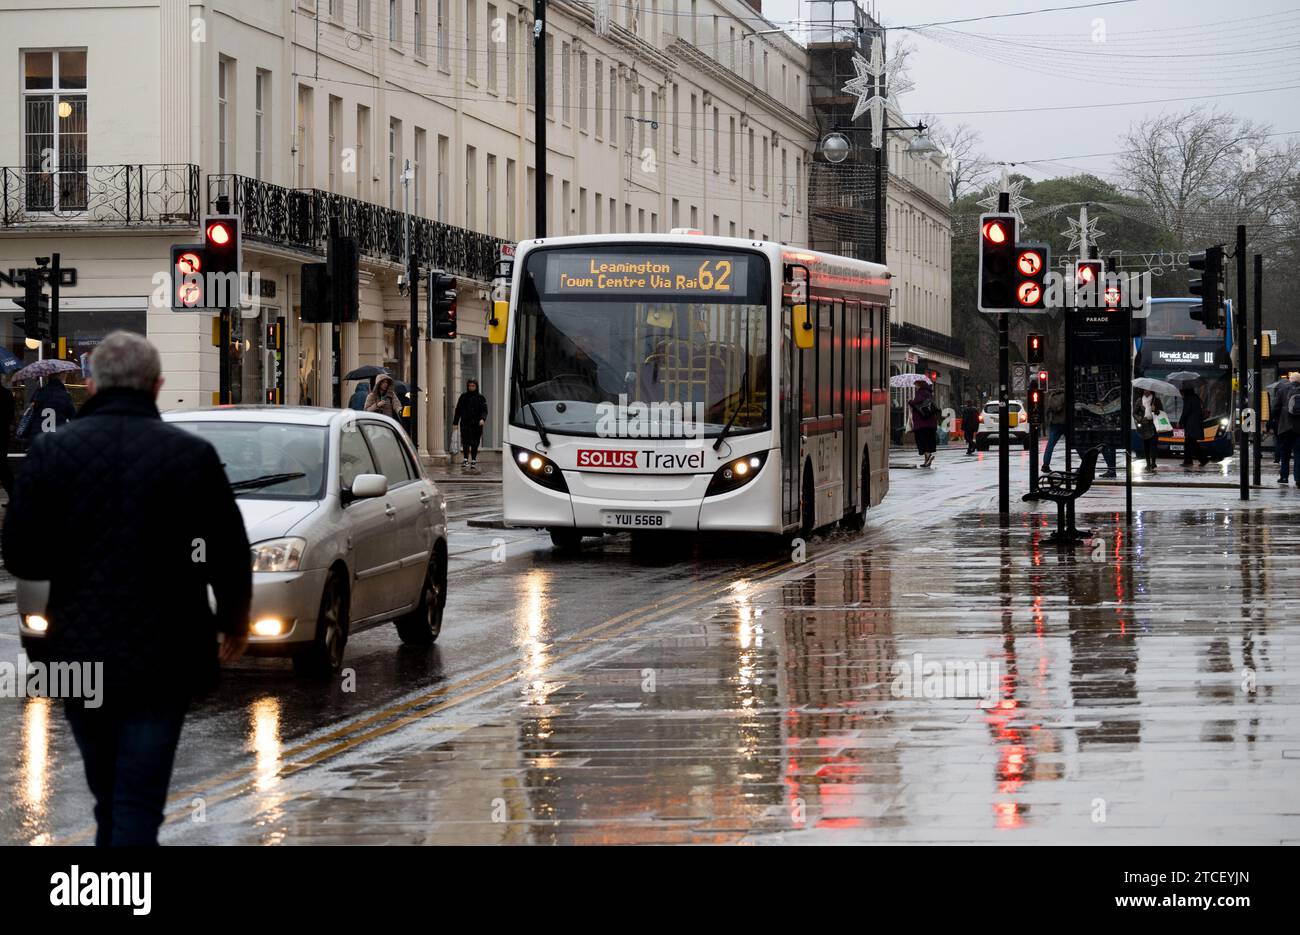 Solus Travel bus service in The Parade during heavy rain, Leamington Spa, Warwickshire, UK Stock Photo